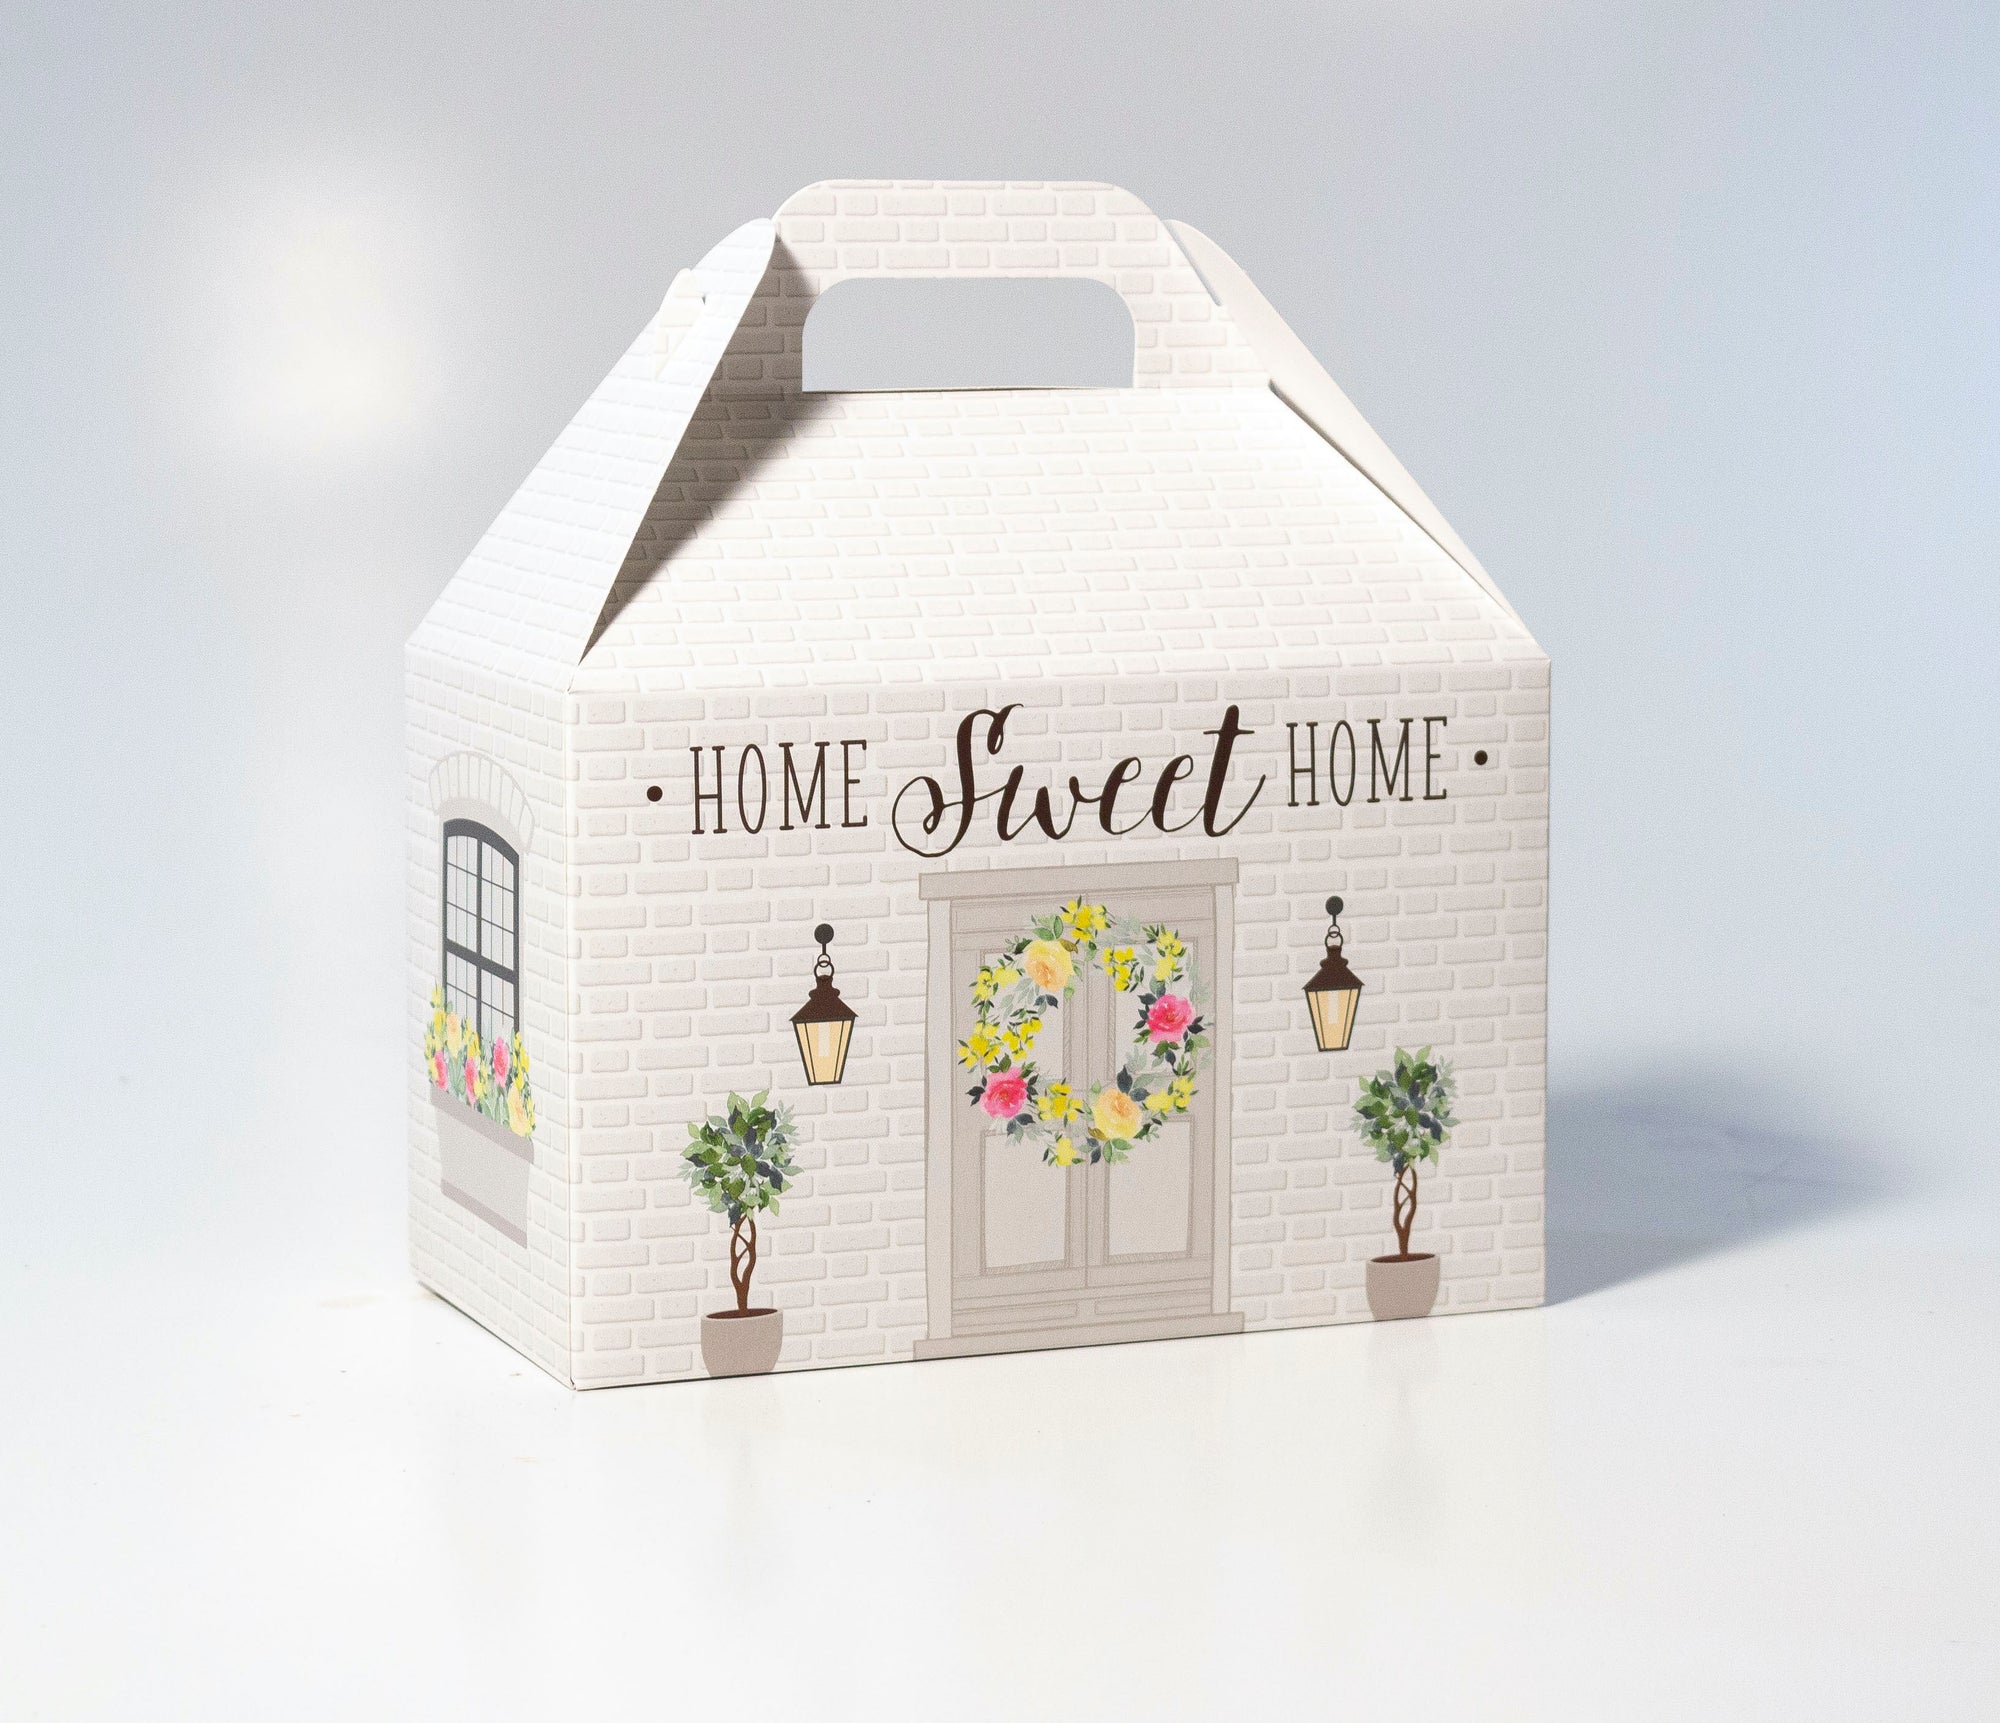 gable gift box shaped like a house with home sweet home text